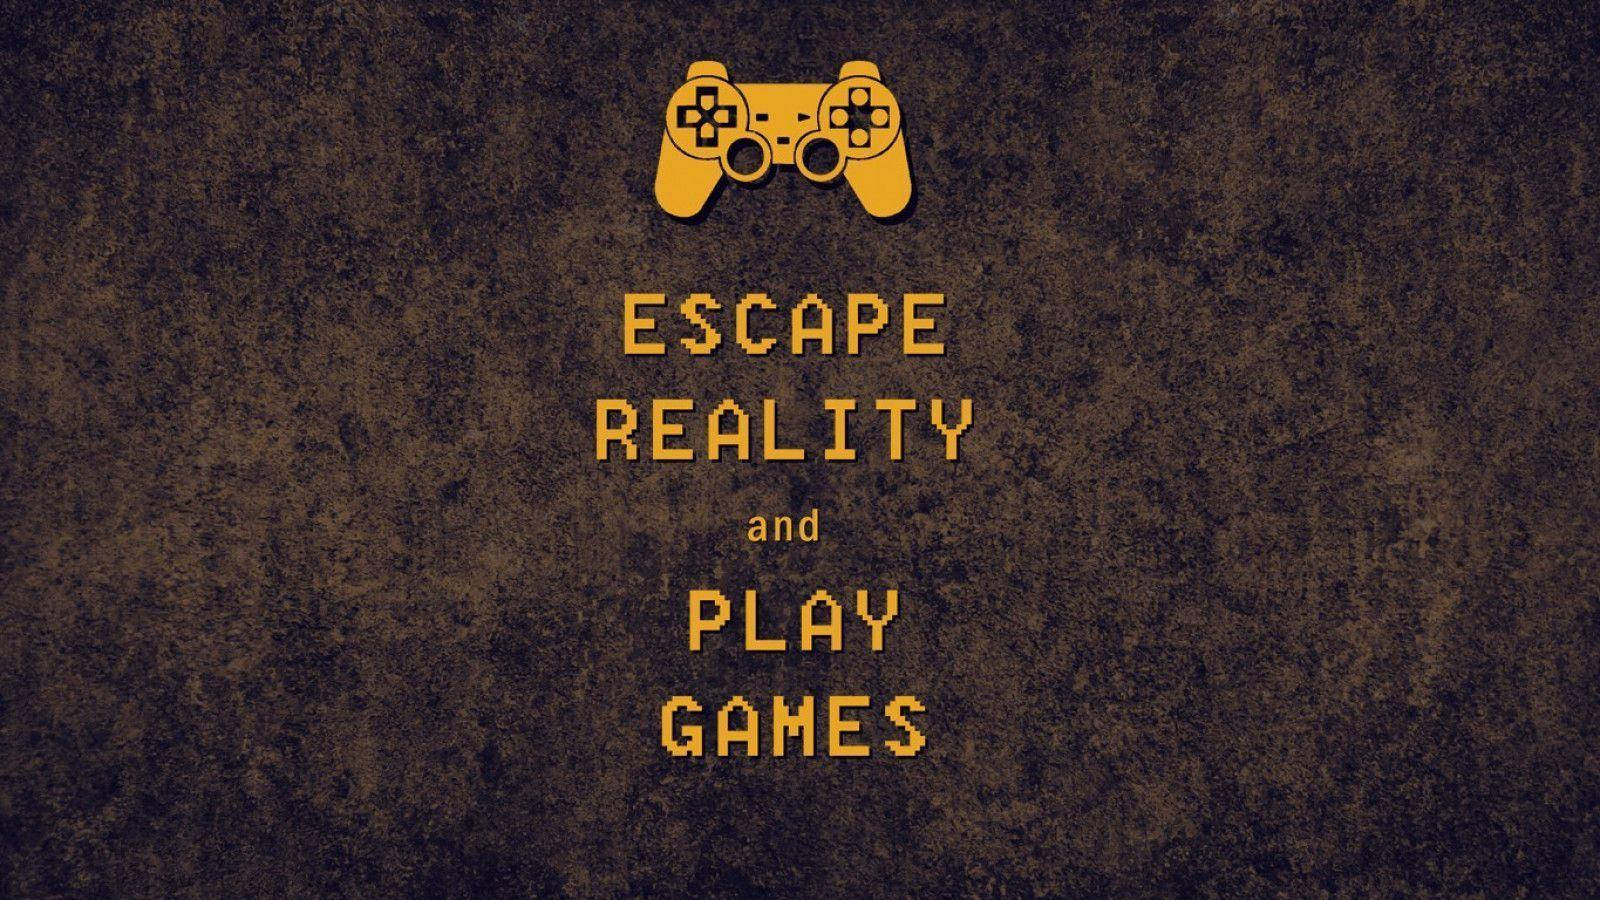 Cool Gaming Escape Reality Quote Wallpaper